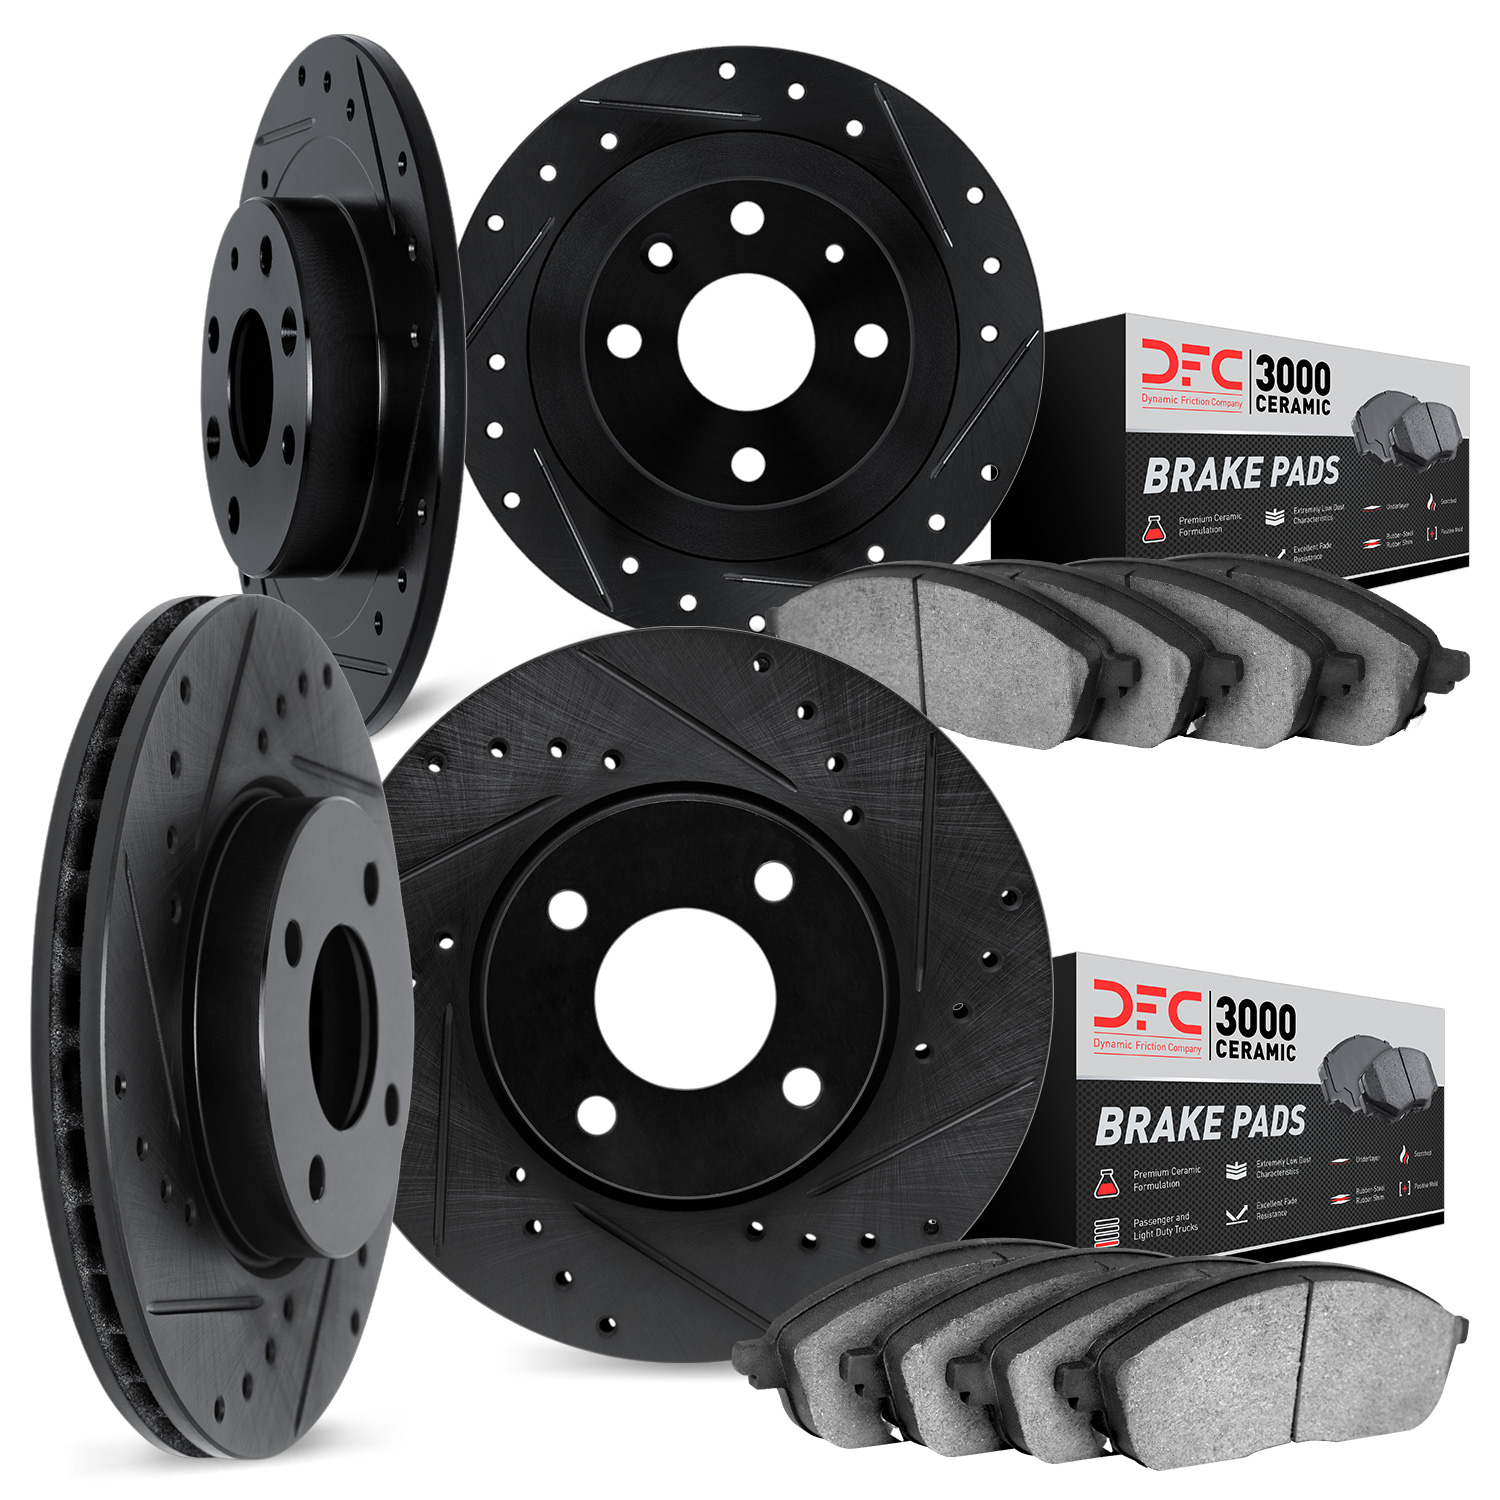 8304-58001 Drilled/Slotted Brake Rotors with 3000-Series Ceramic Brake Pads Kit [Black], 1986-1987 Acura/Honda, Position: Front